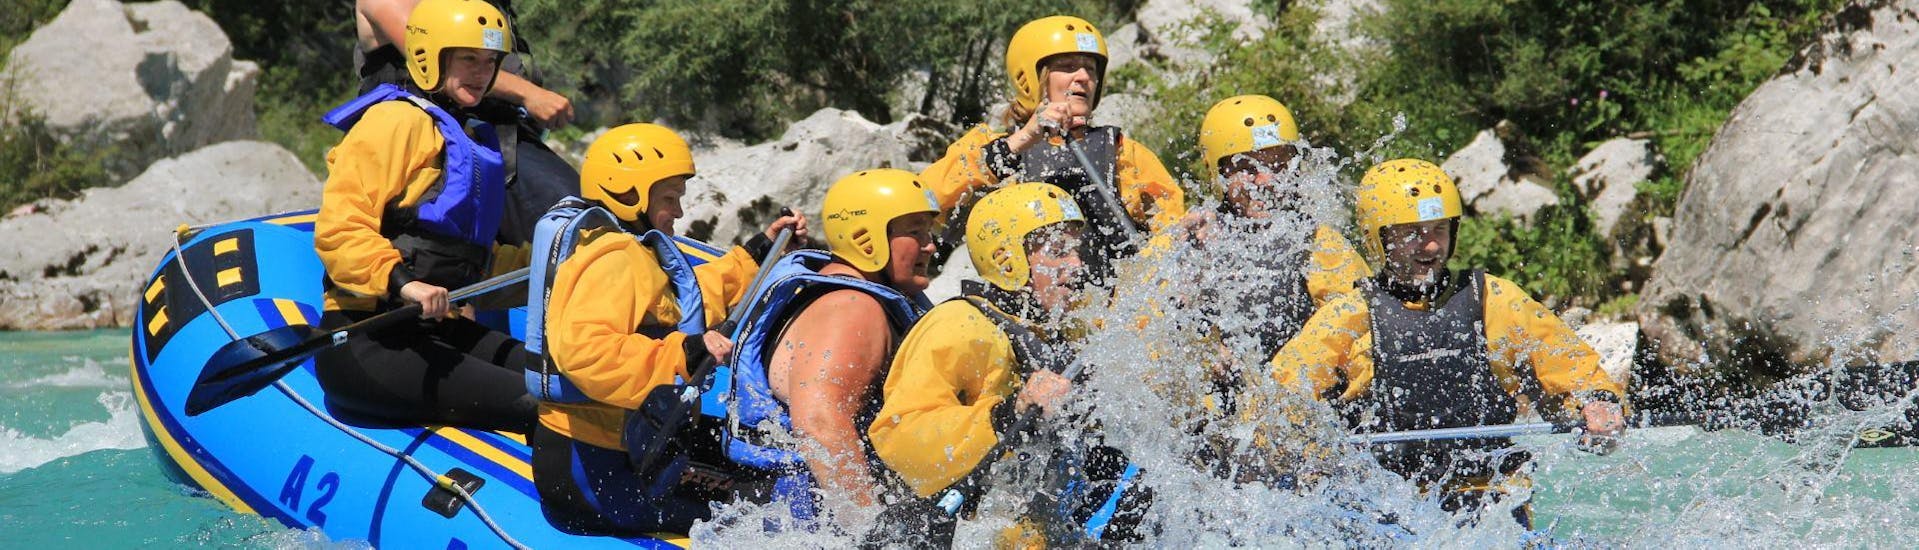 Rafting on the Soča River - Go 2 Action Tour with A2 Rafting Kobarid - Hero image